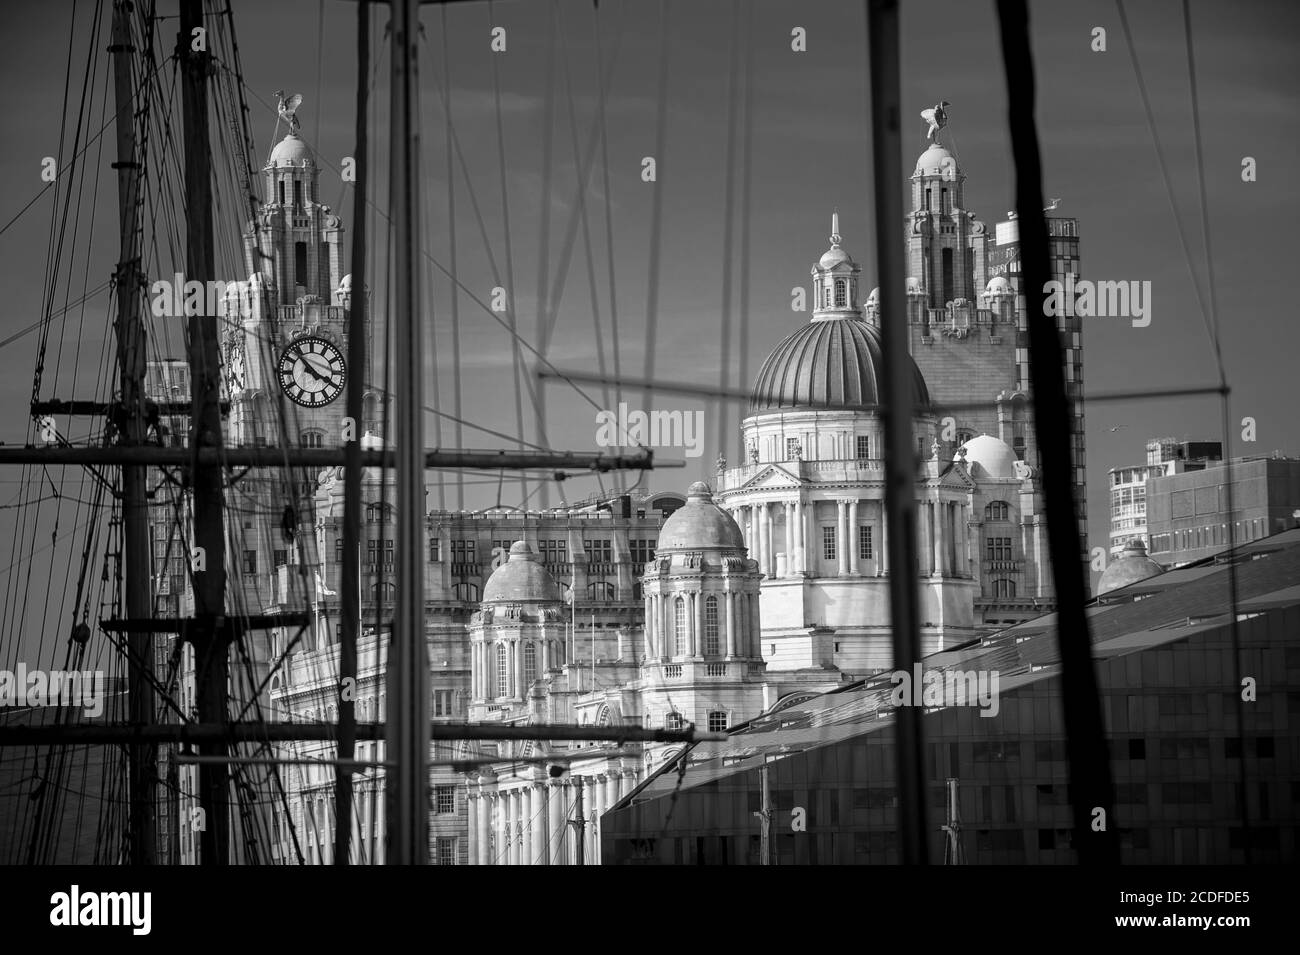 View through defocused rigging and masts of ships to iconic grand old waterfront buildings, the three graces, of Liverpool, UK. Selective focus on bui Stock Photo